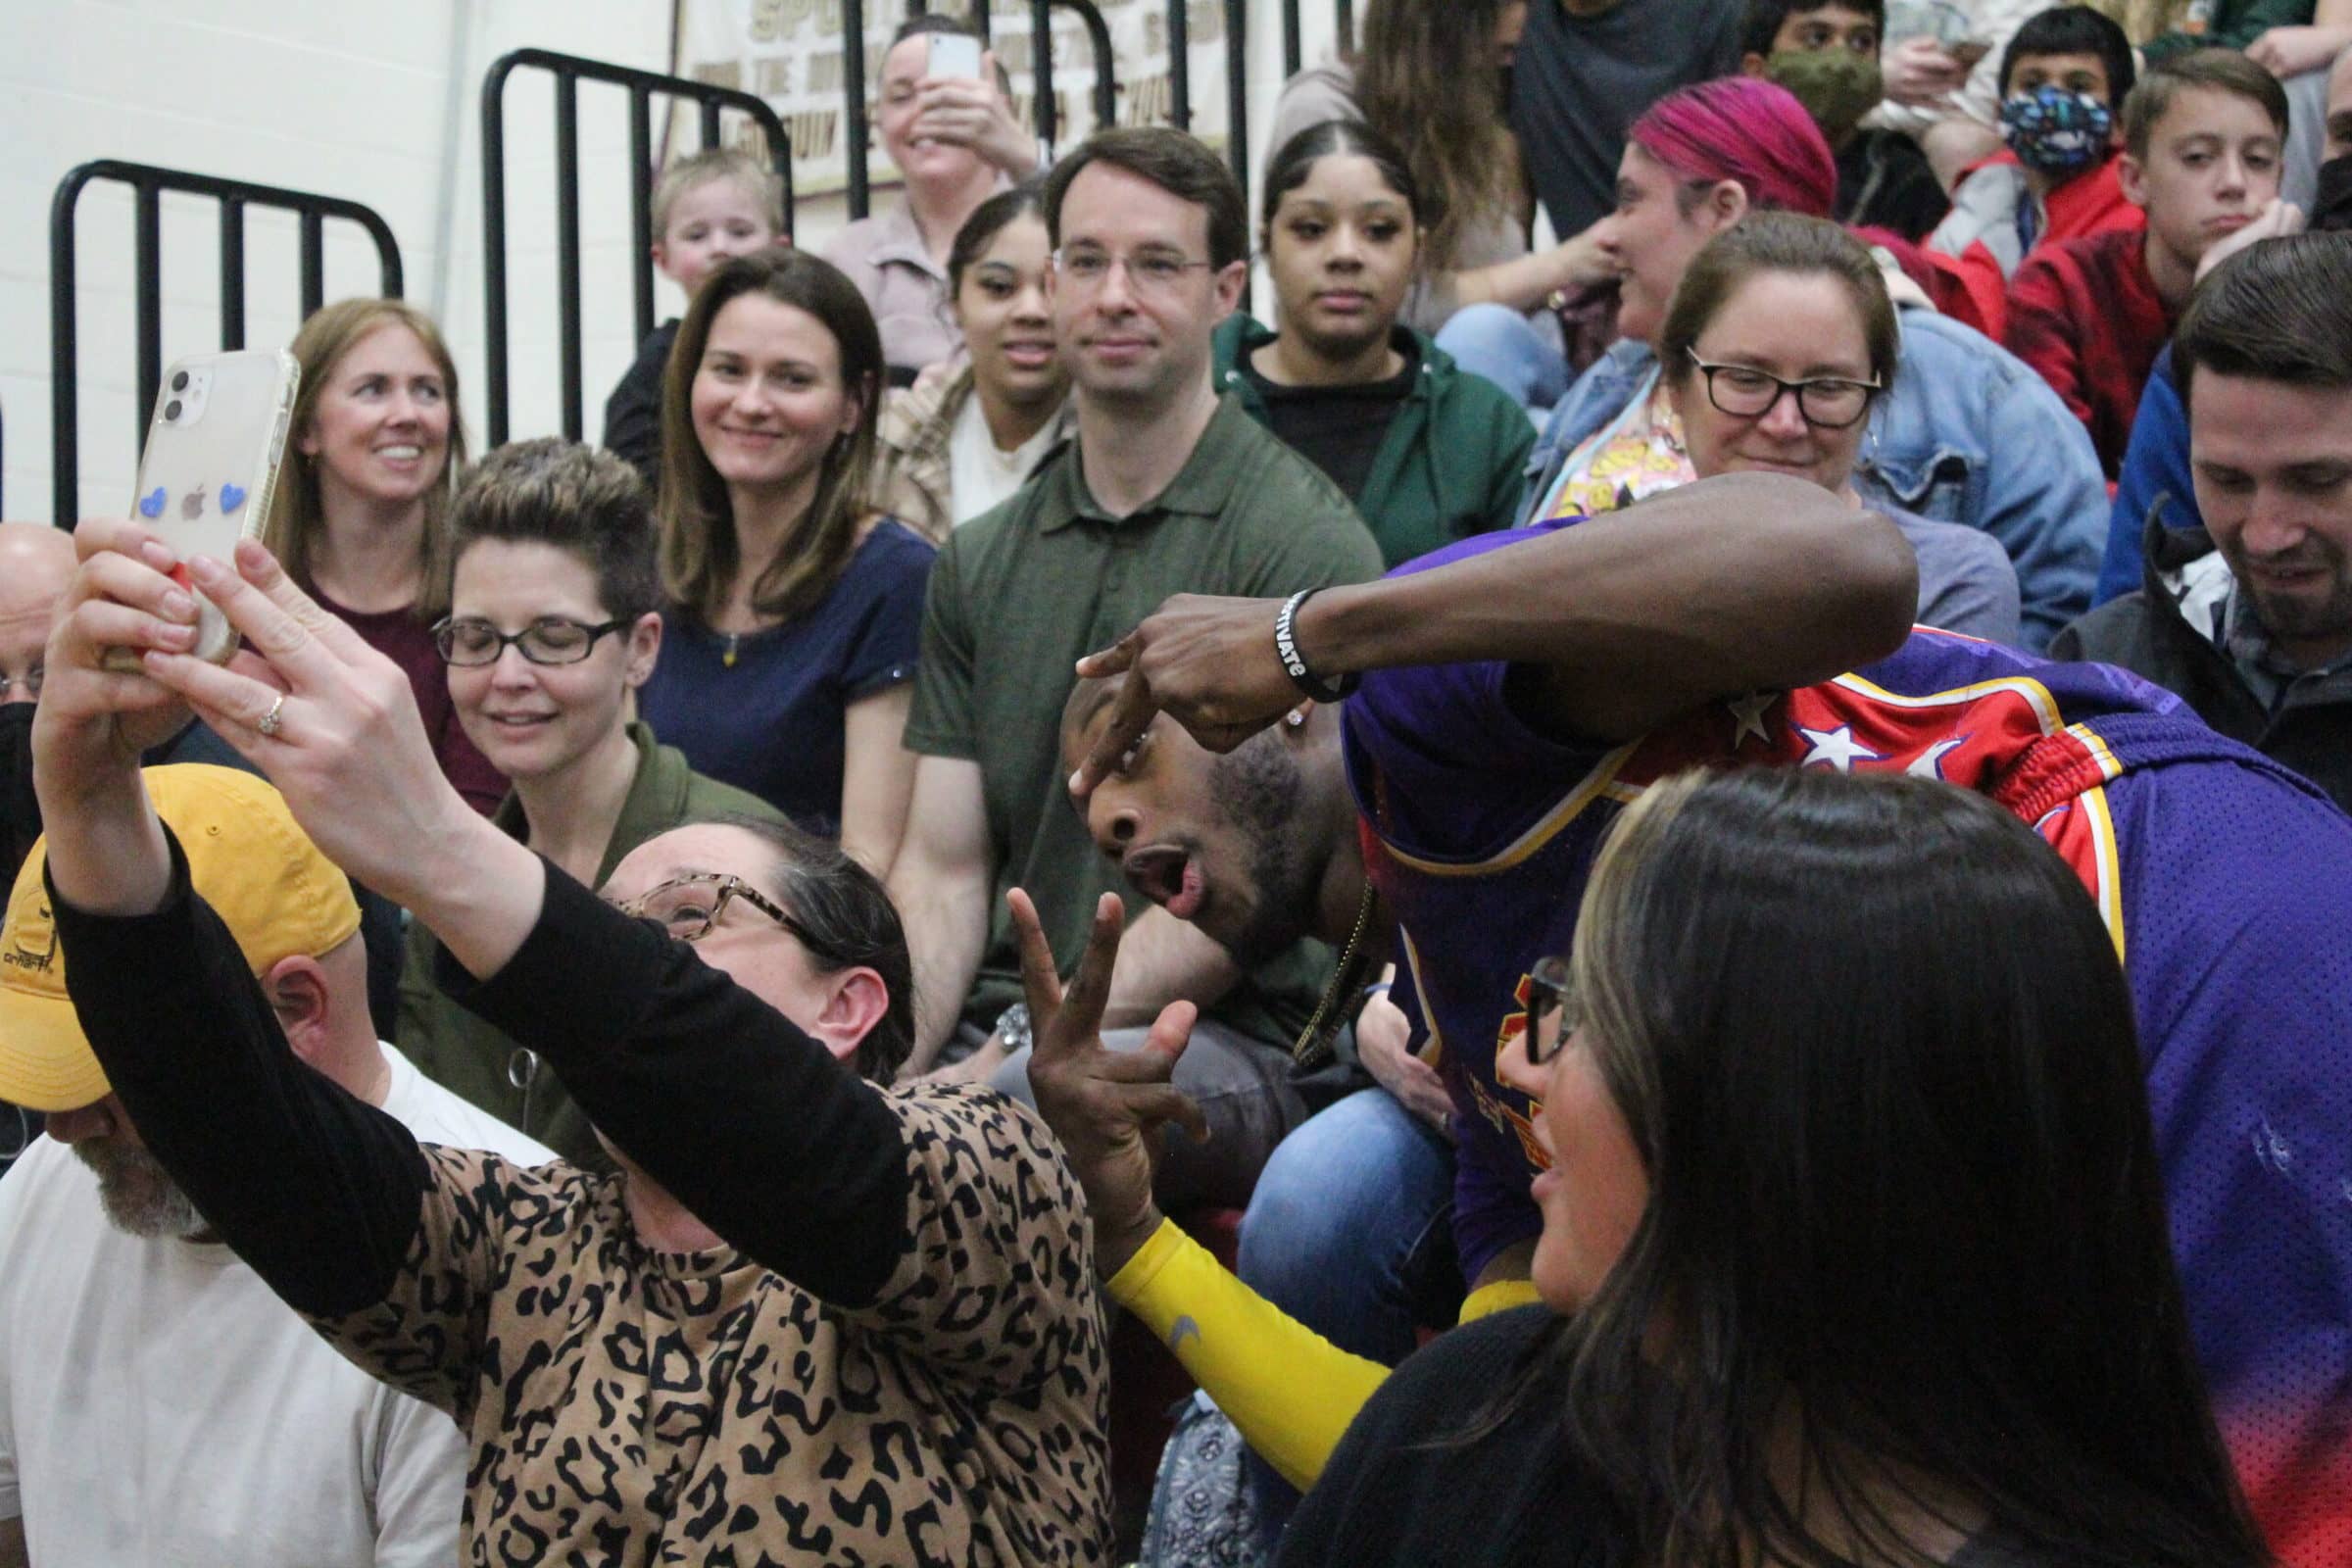 Harlem Wizards come to Northborough for schools fundraiser